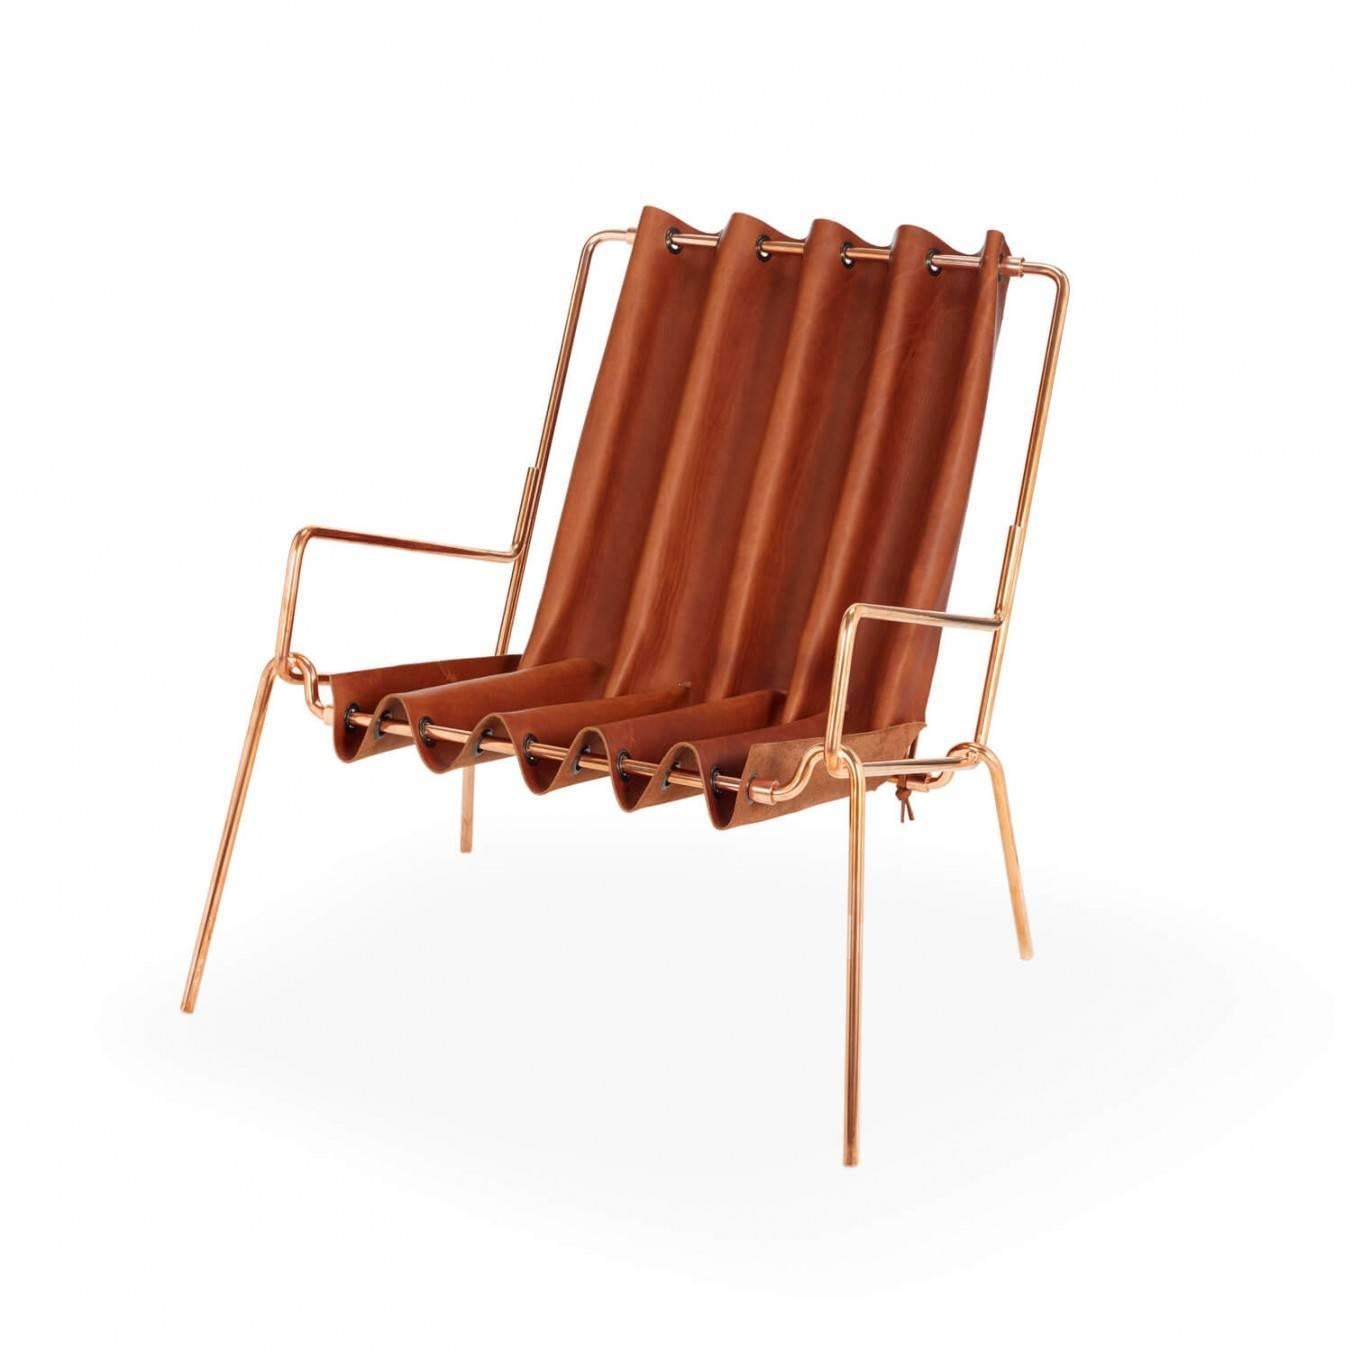 Using the undulating forms of a curtain as it hangs from a pole, this chair uses a mix of precision geometry and origami patterns to create a complex shape from a single piece of Tuscan vegetable tanned leather which was handmade in England.
A